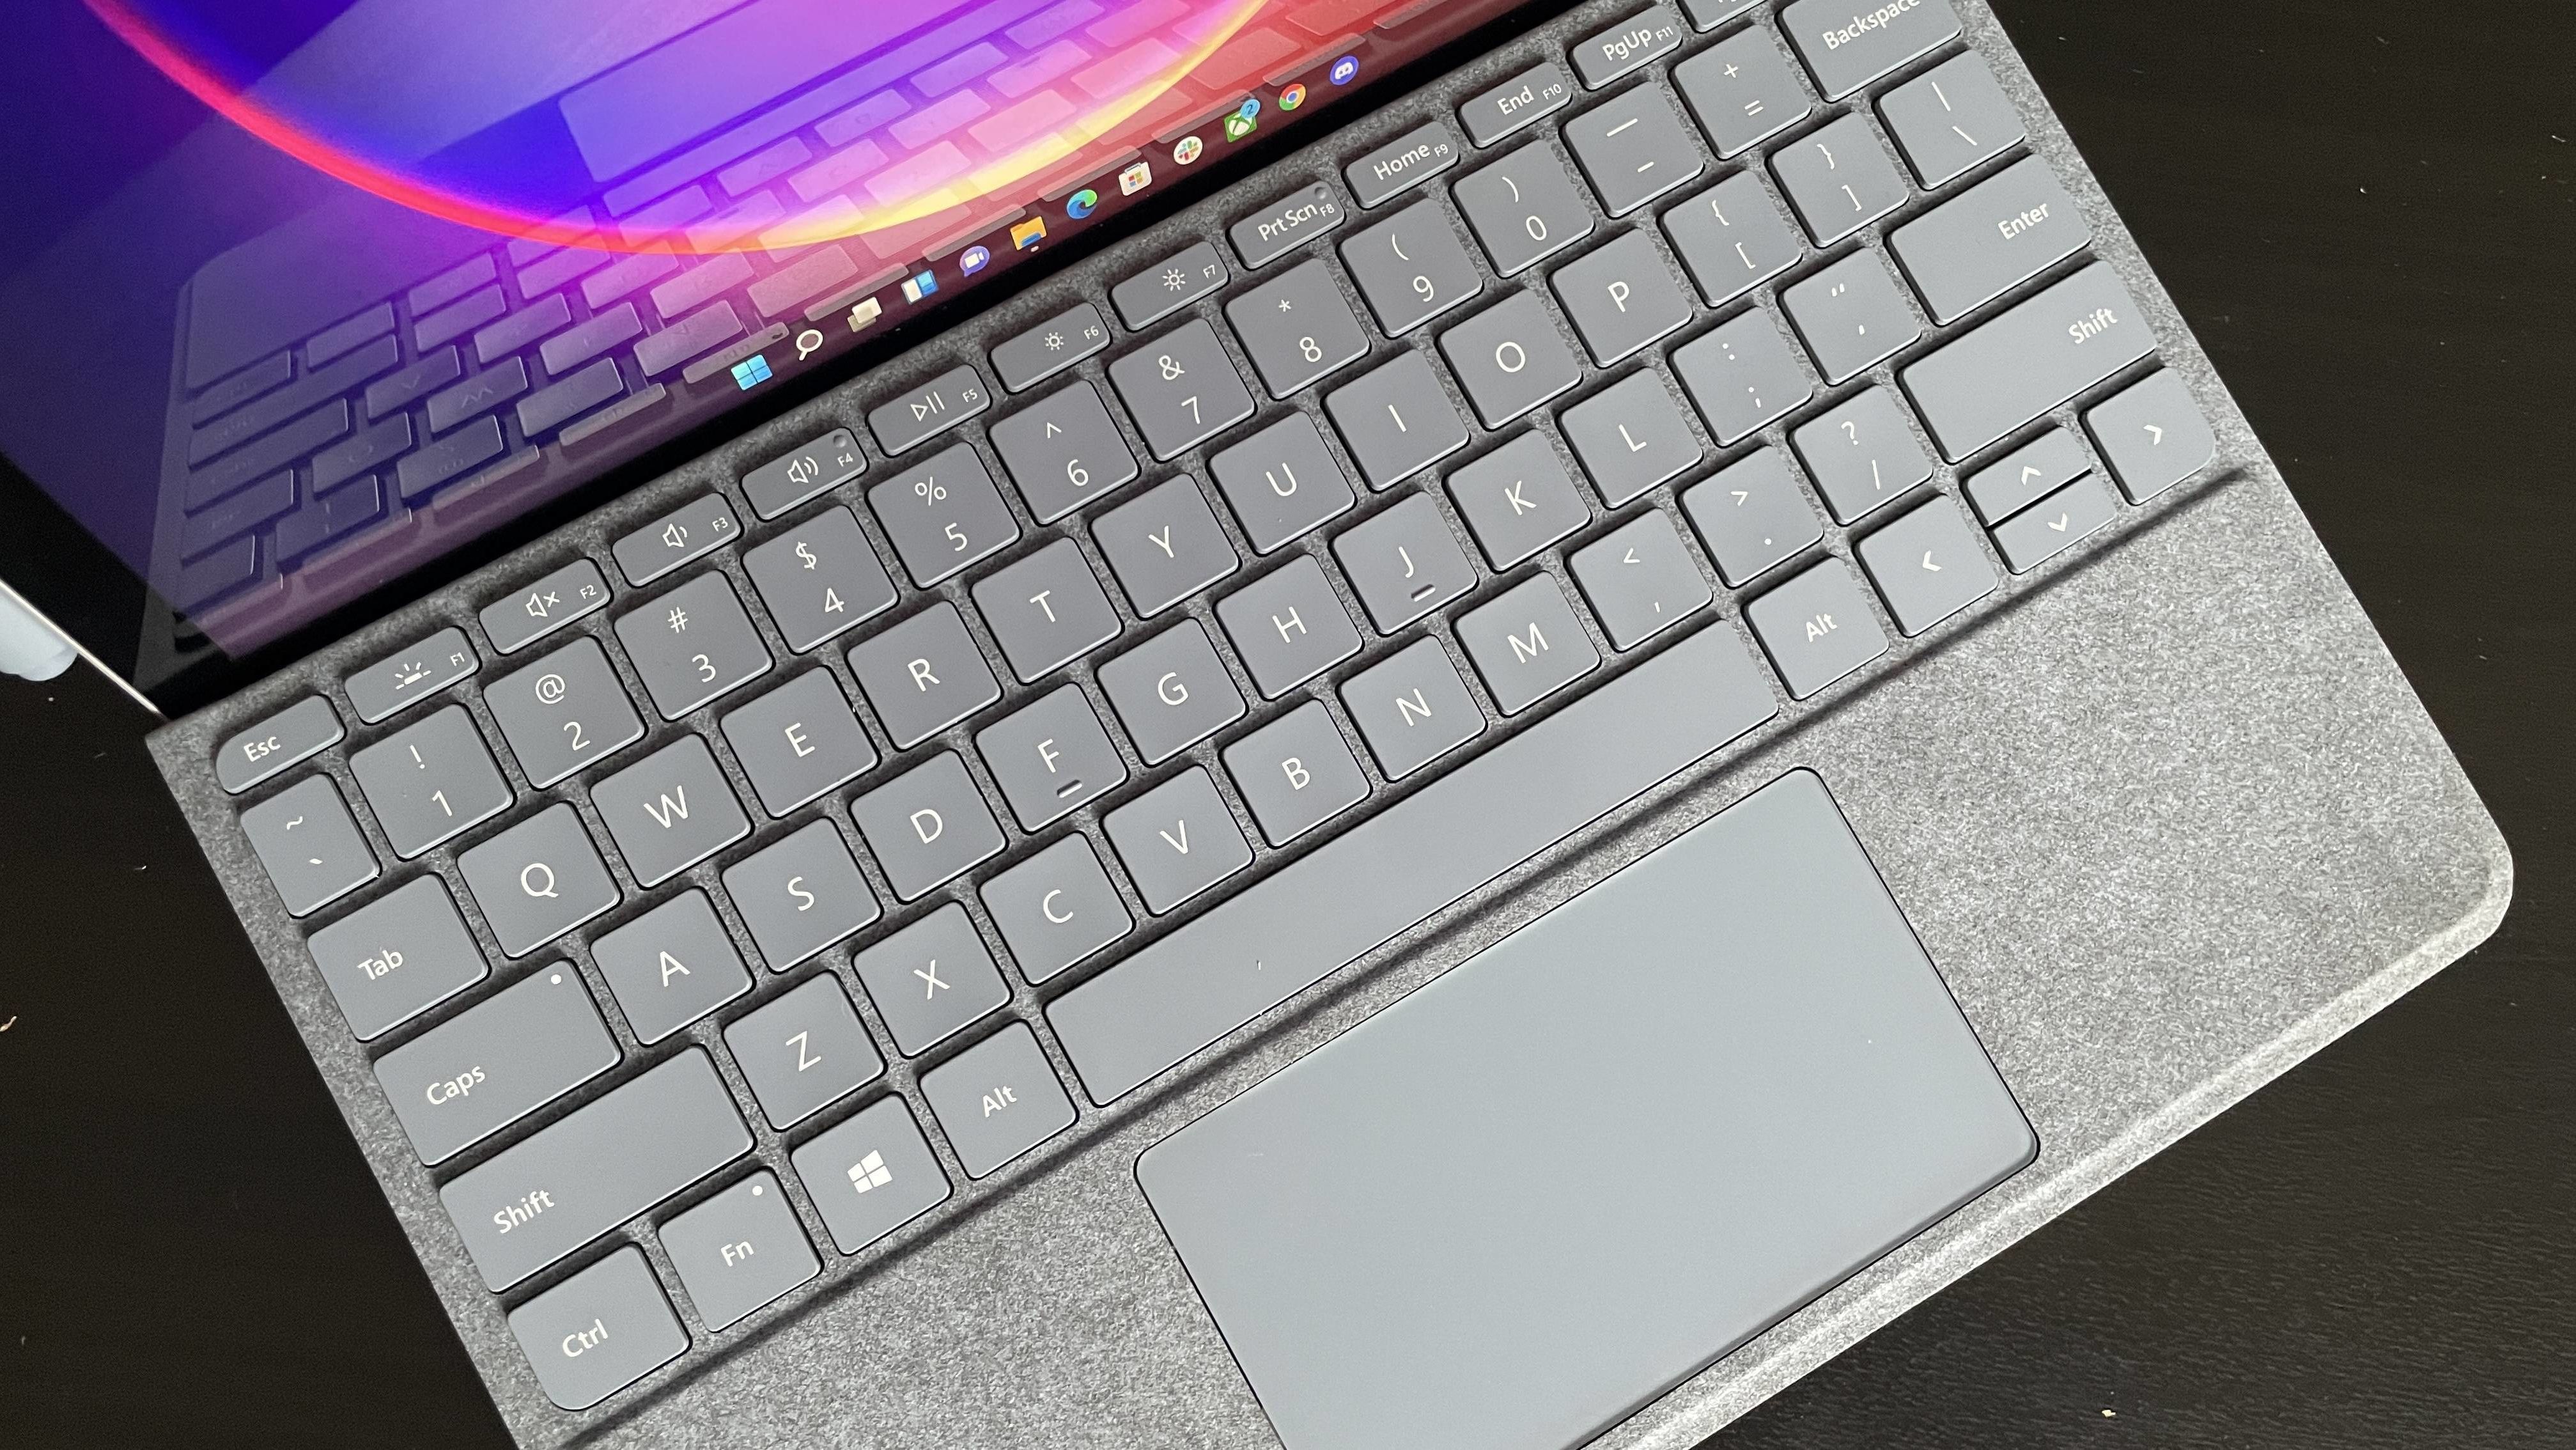 Microsoft Surface Go review: This shrunken-down Surface is fun and  practical, but more expensive than it looks - CNET